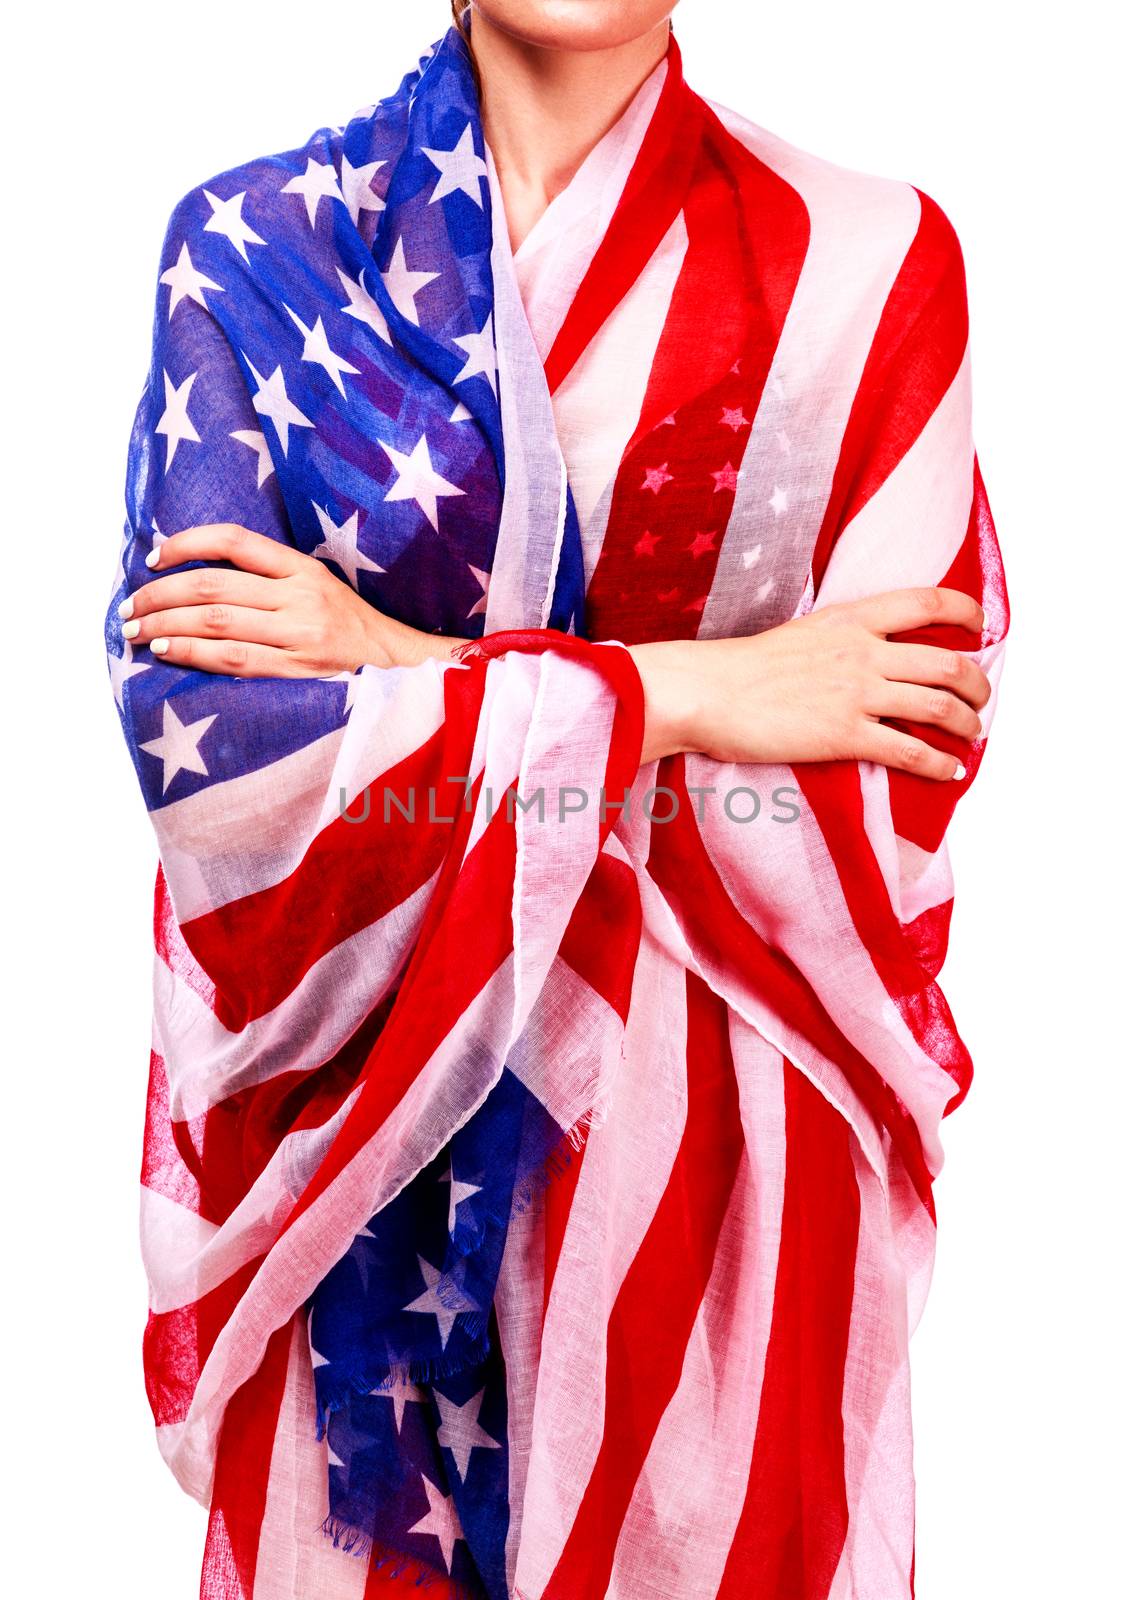 Woman's body wrapped in the USA national flag, isolated on white background